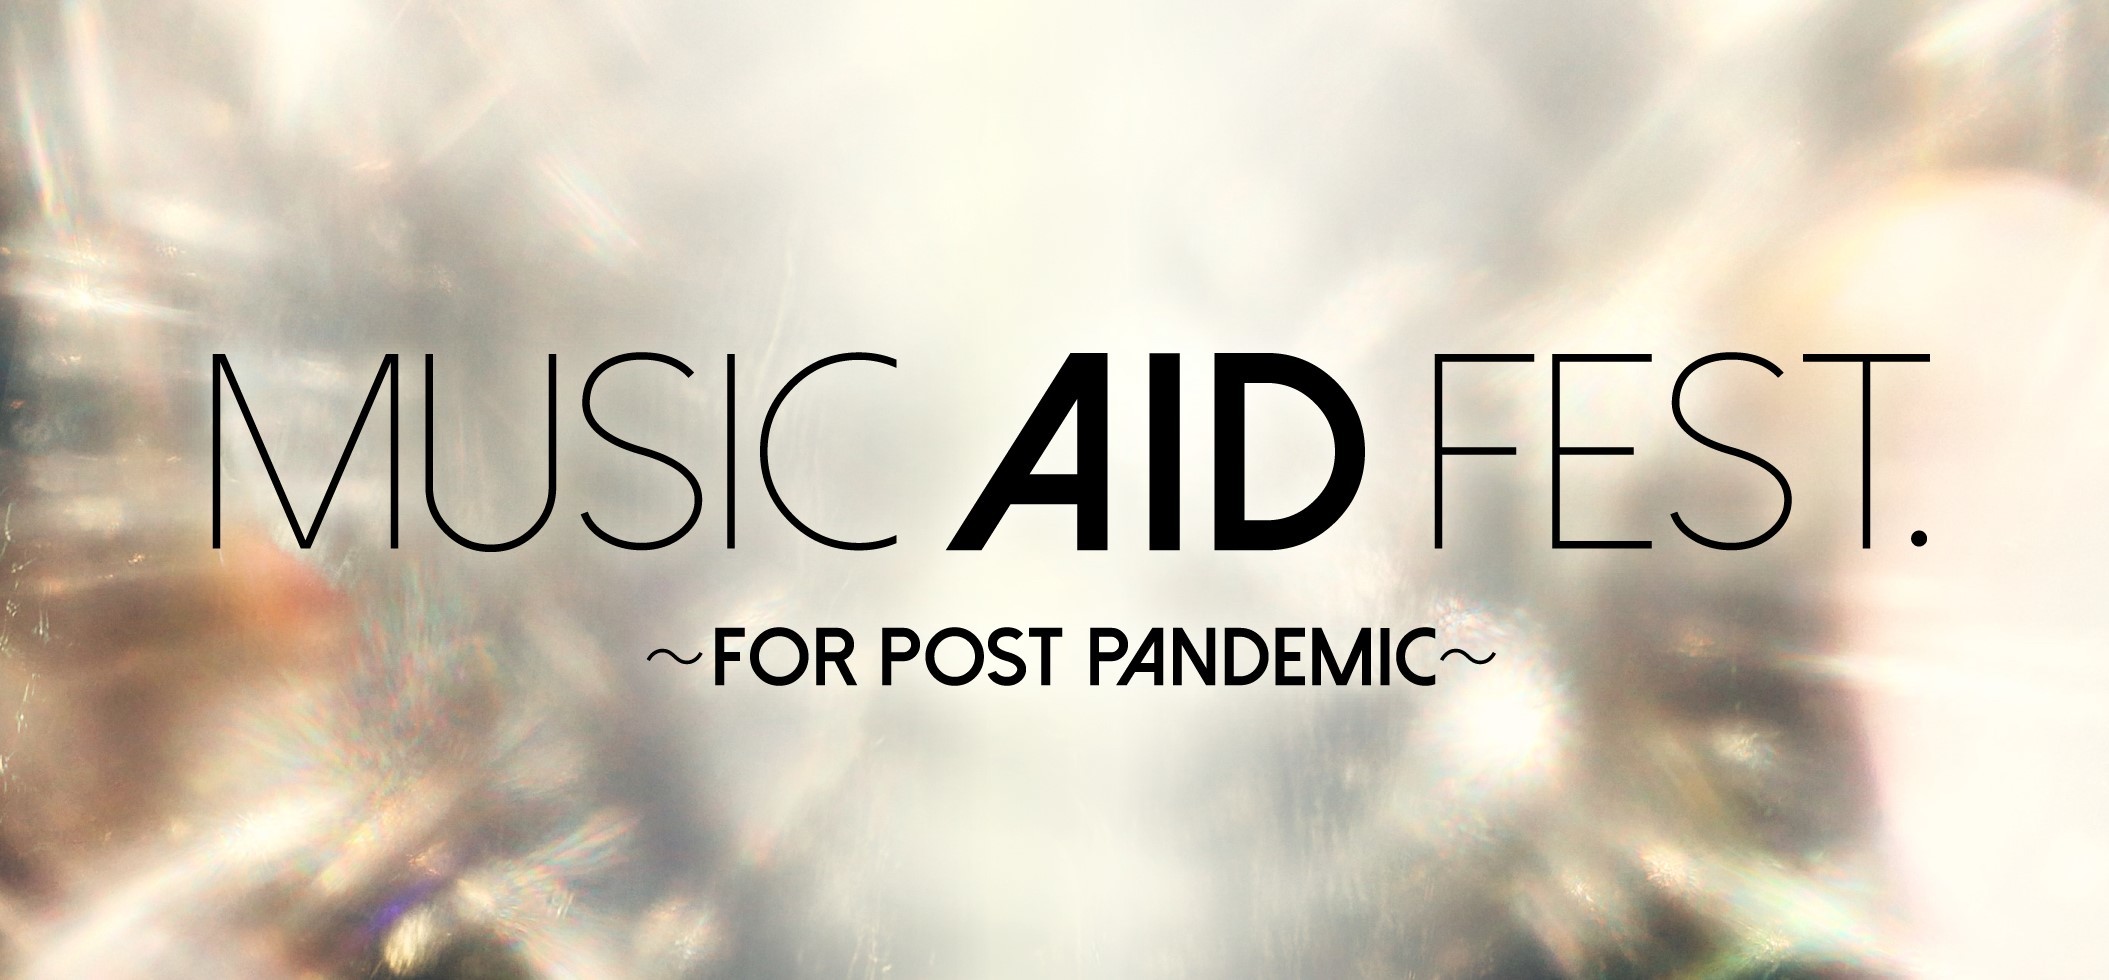 MUSIC AID FEST.〜FOR POST PANDEMIC〜